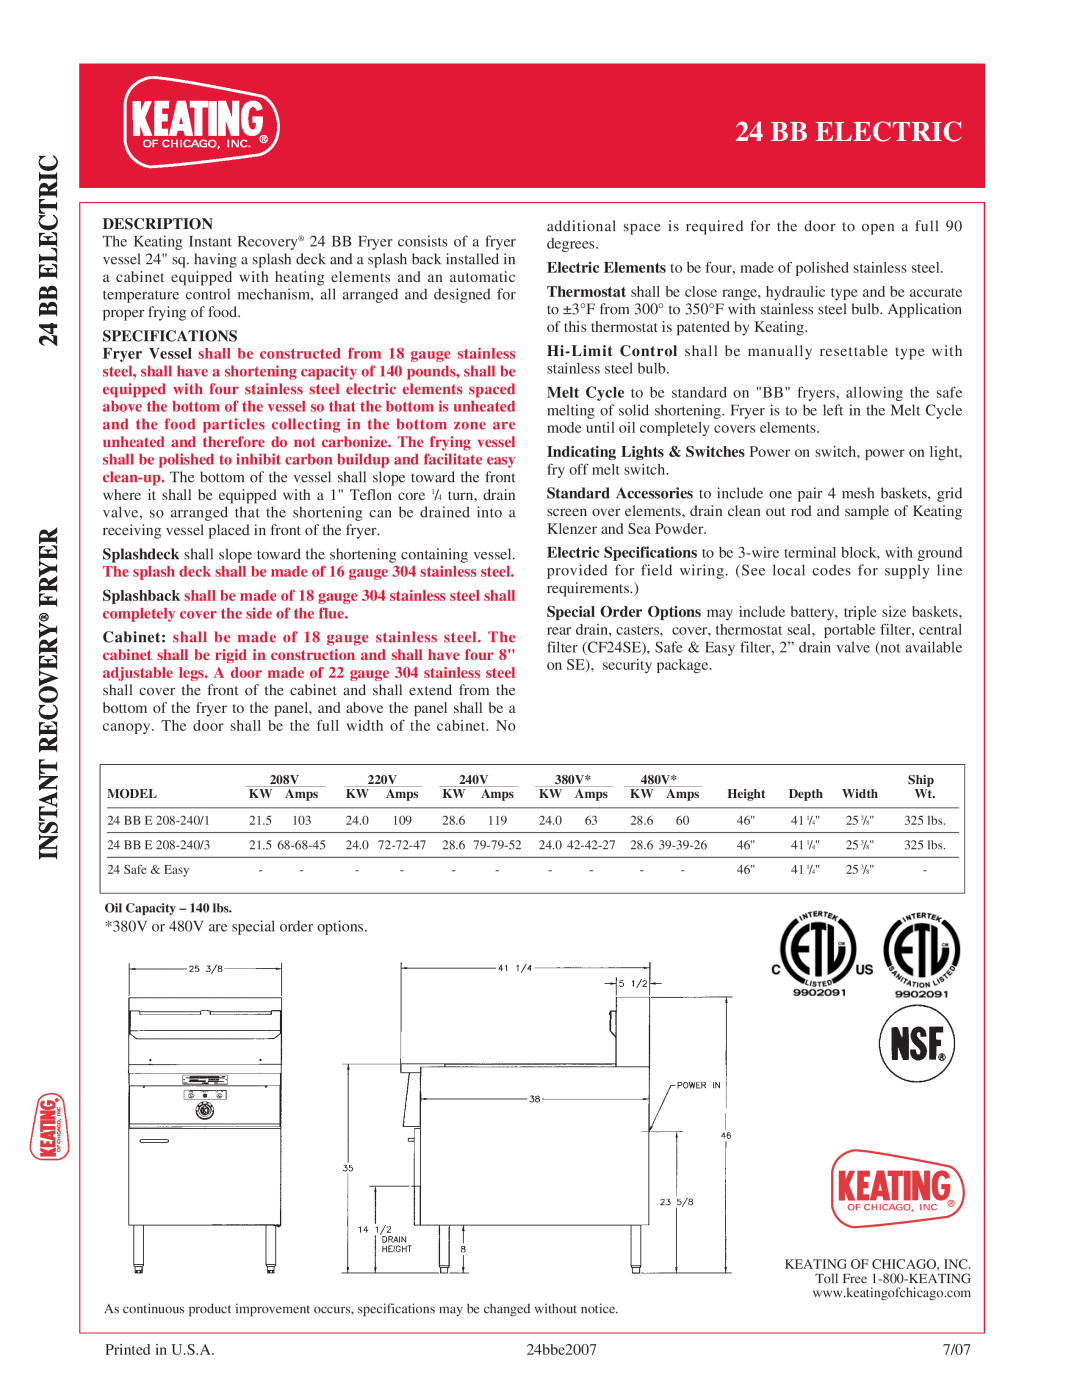 Keating Of Chicago 24 BB manual Bb Electric Recovery Fryer, Instant, Description, Specifications 